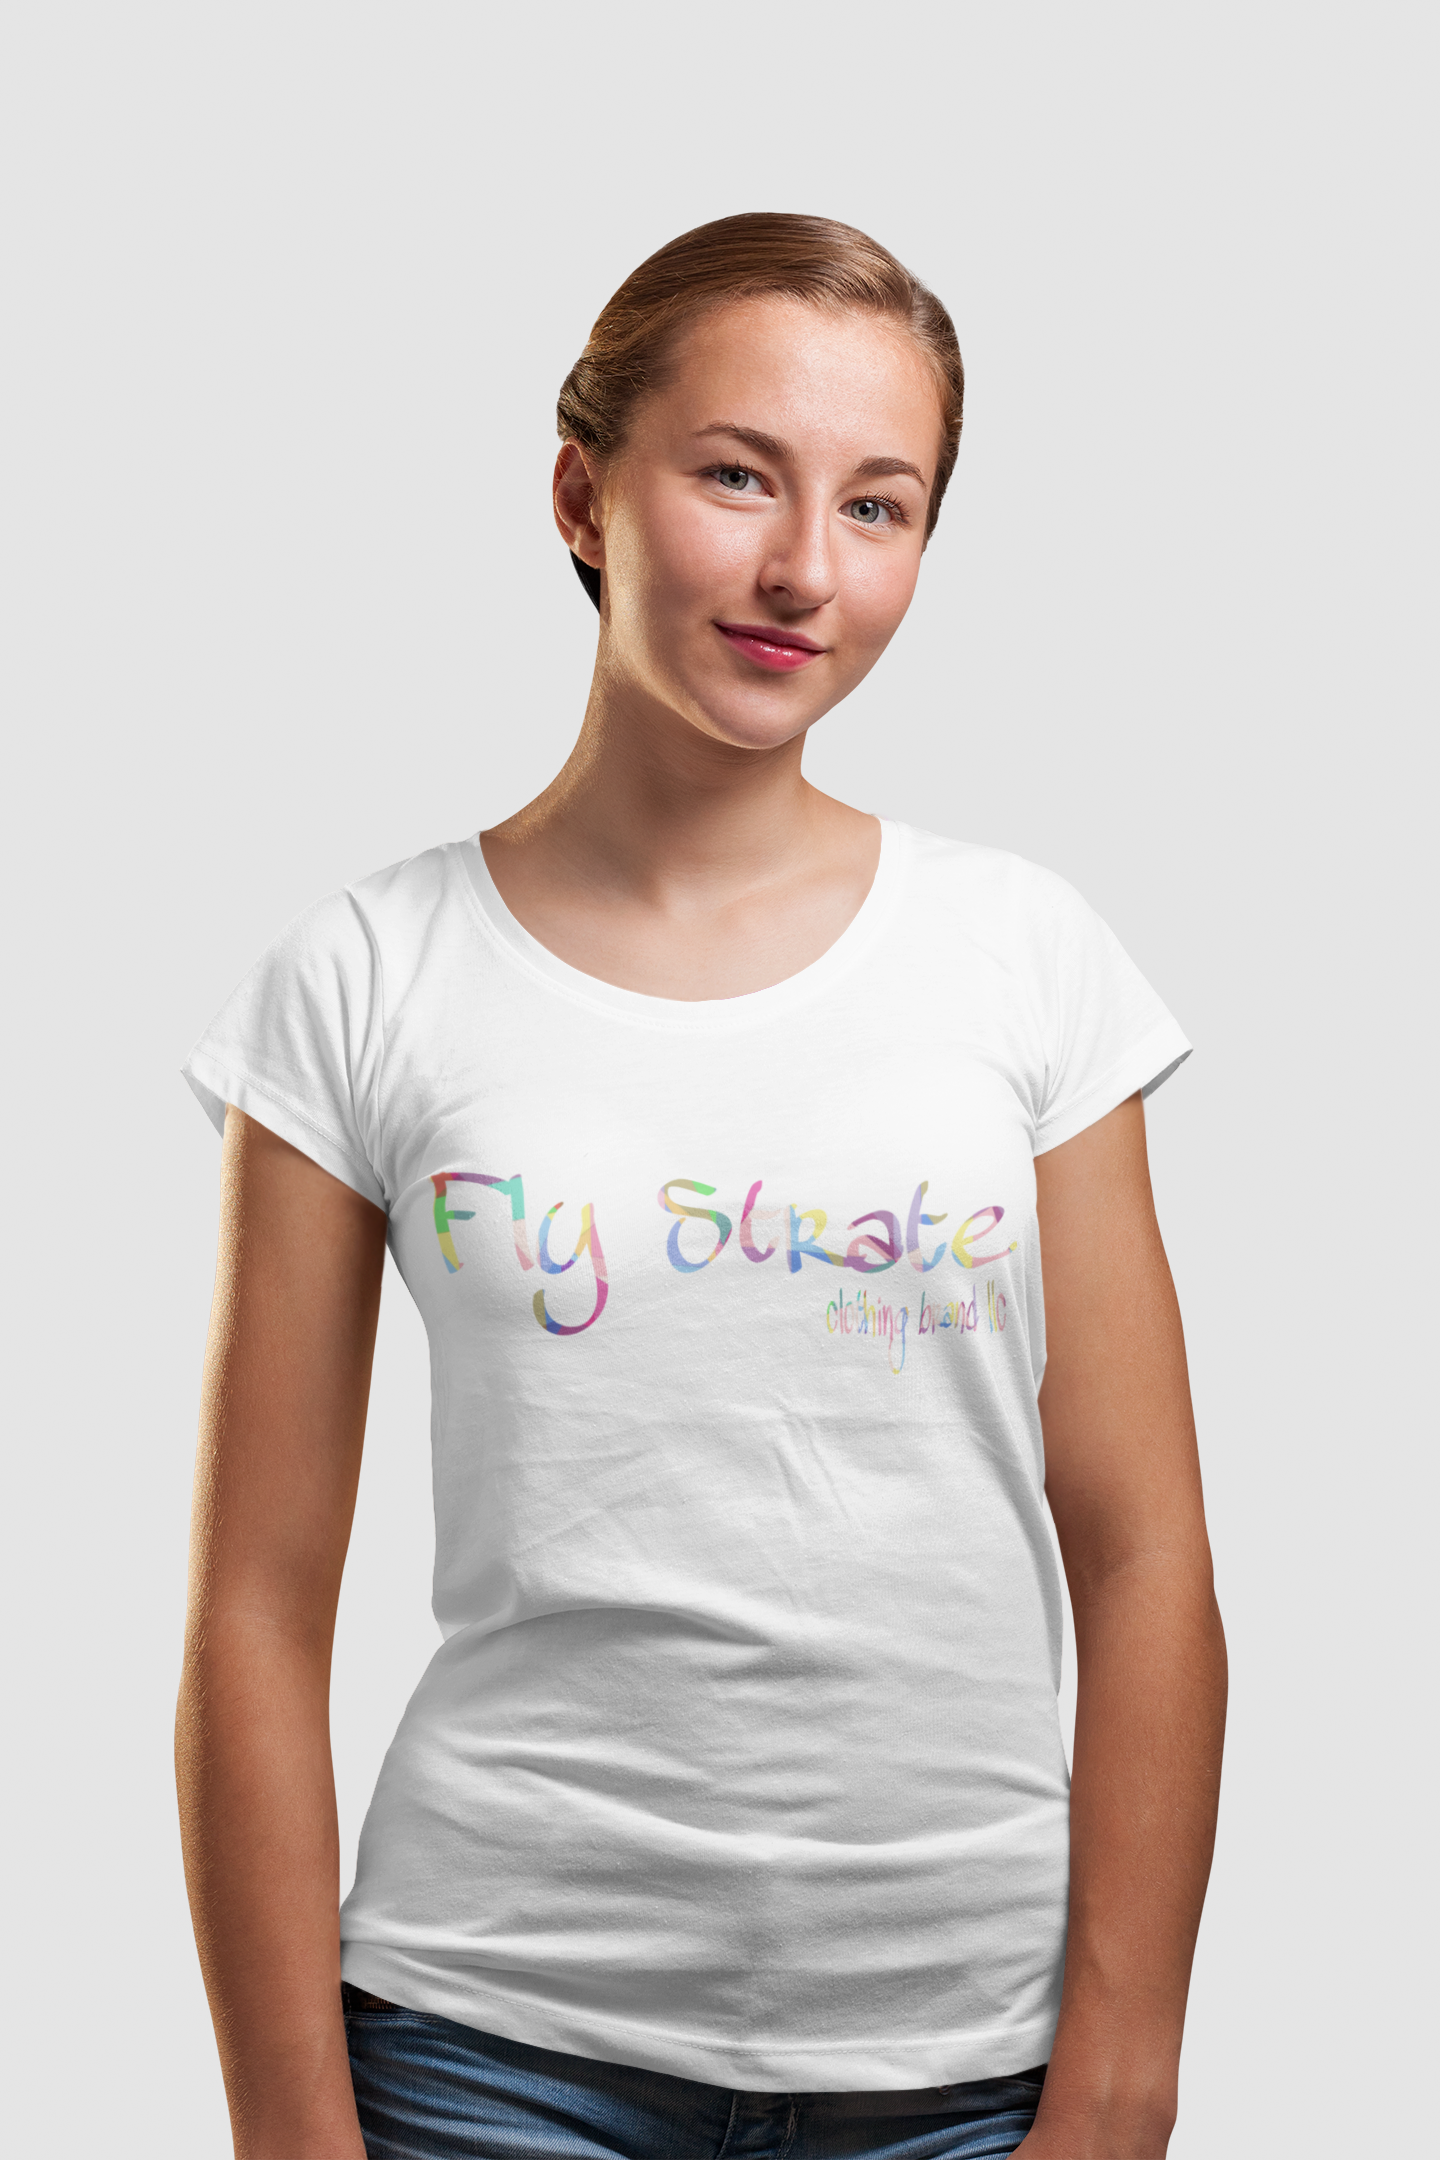 FlyStrate ladies the flavors T-Shirt